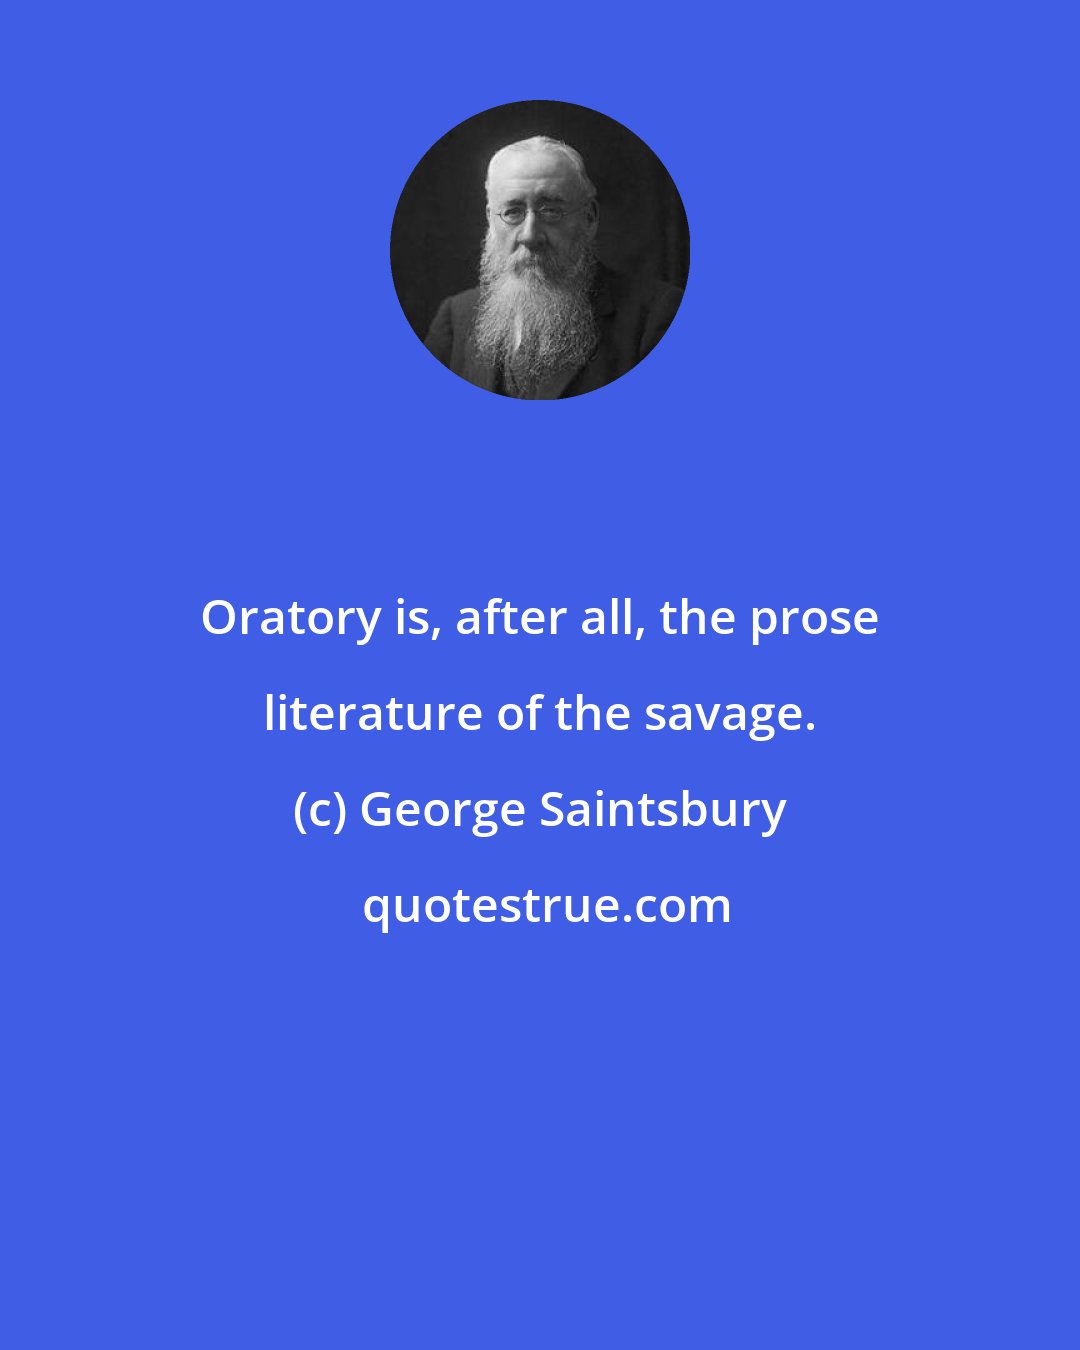 George Saintsbury: Oratory is, after all, the prose literature of the savage.